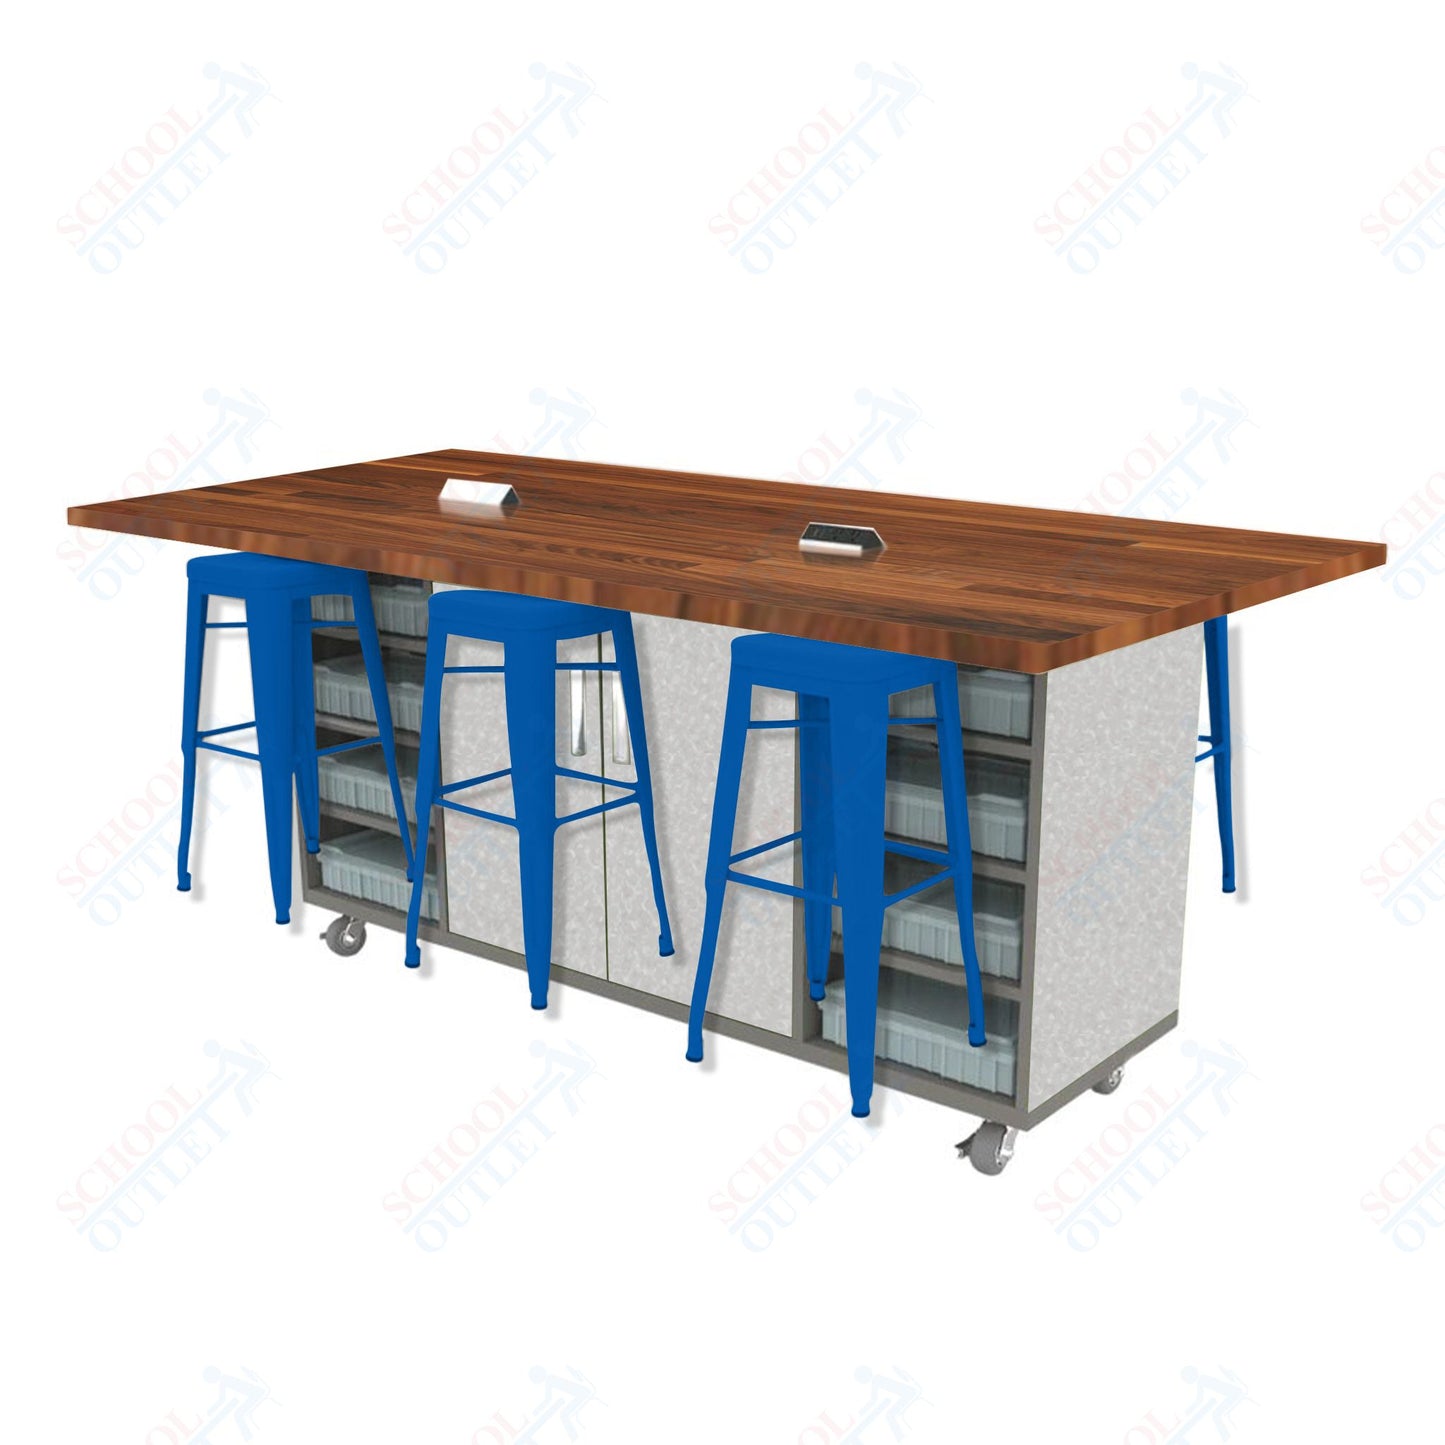 CEF ED Double Table 42"H Butcher Block Top, Laminate Base with  6 Stools, Storage bins, and Electrical Outlets Included.